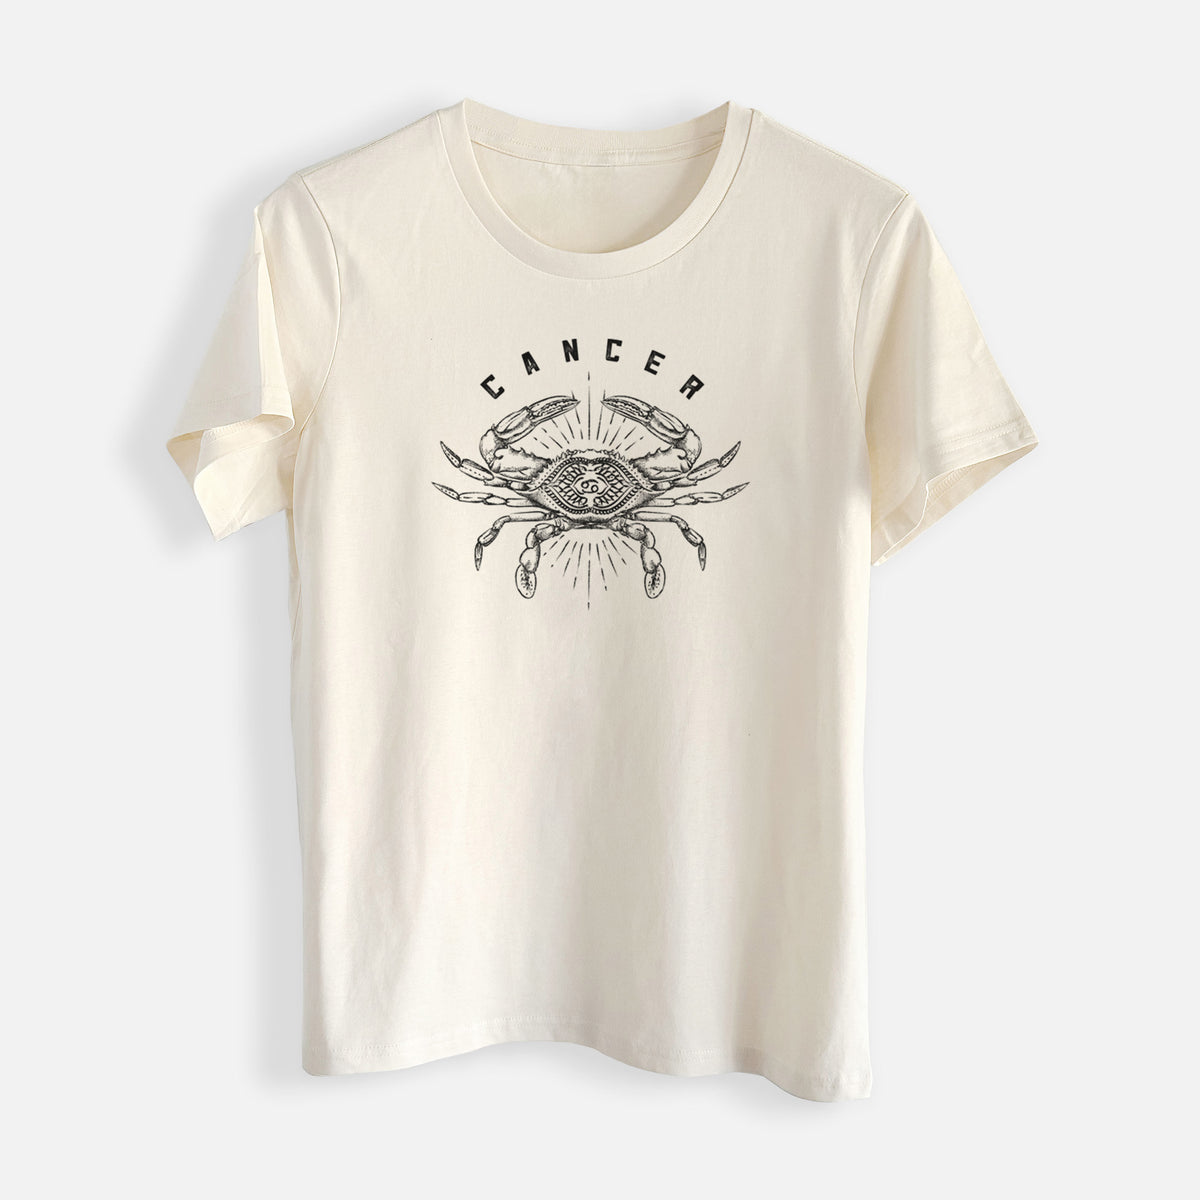 Cancer - Crab - Womens Everyday Maple Tee